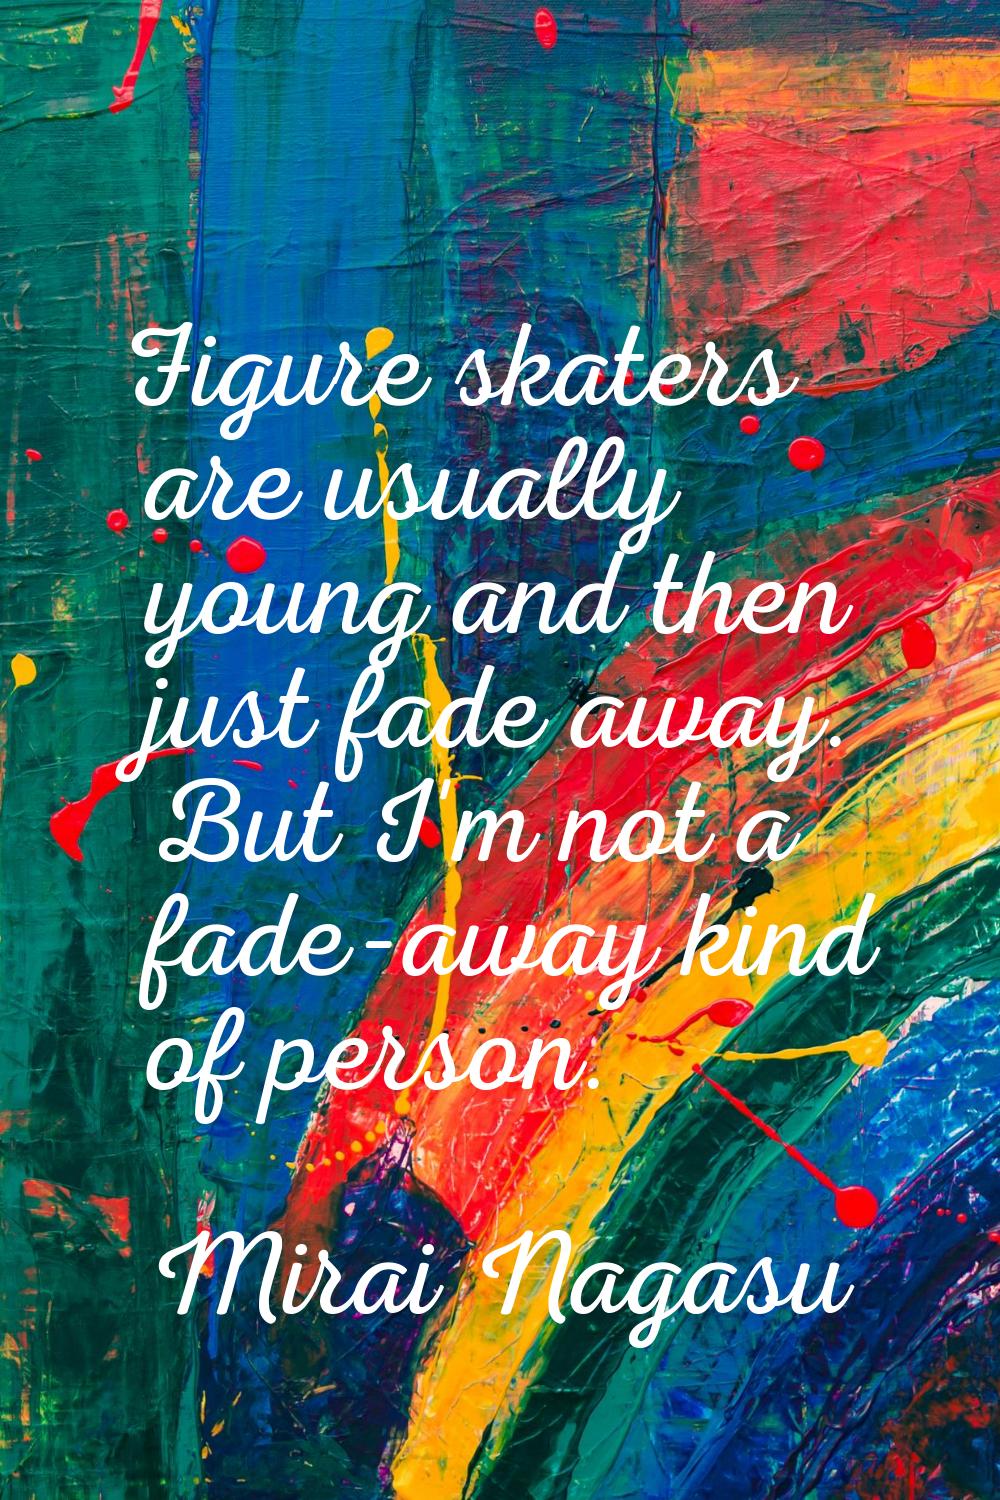 Figure skaters are usually young and then just fade away. But I'm not a fade-away kind of person.